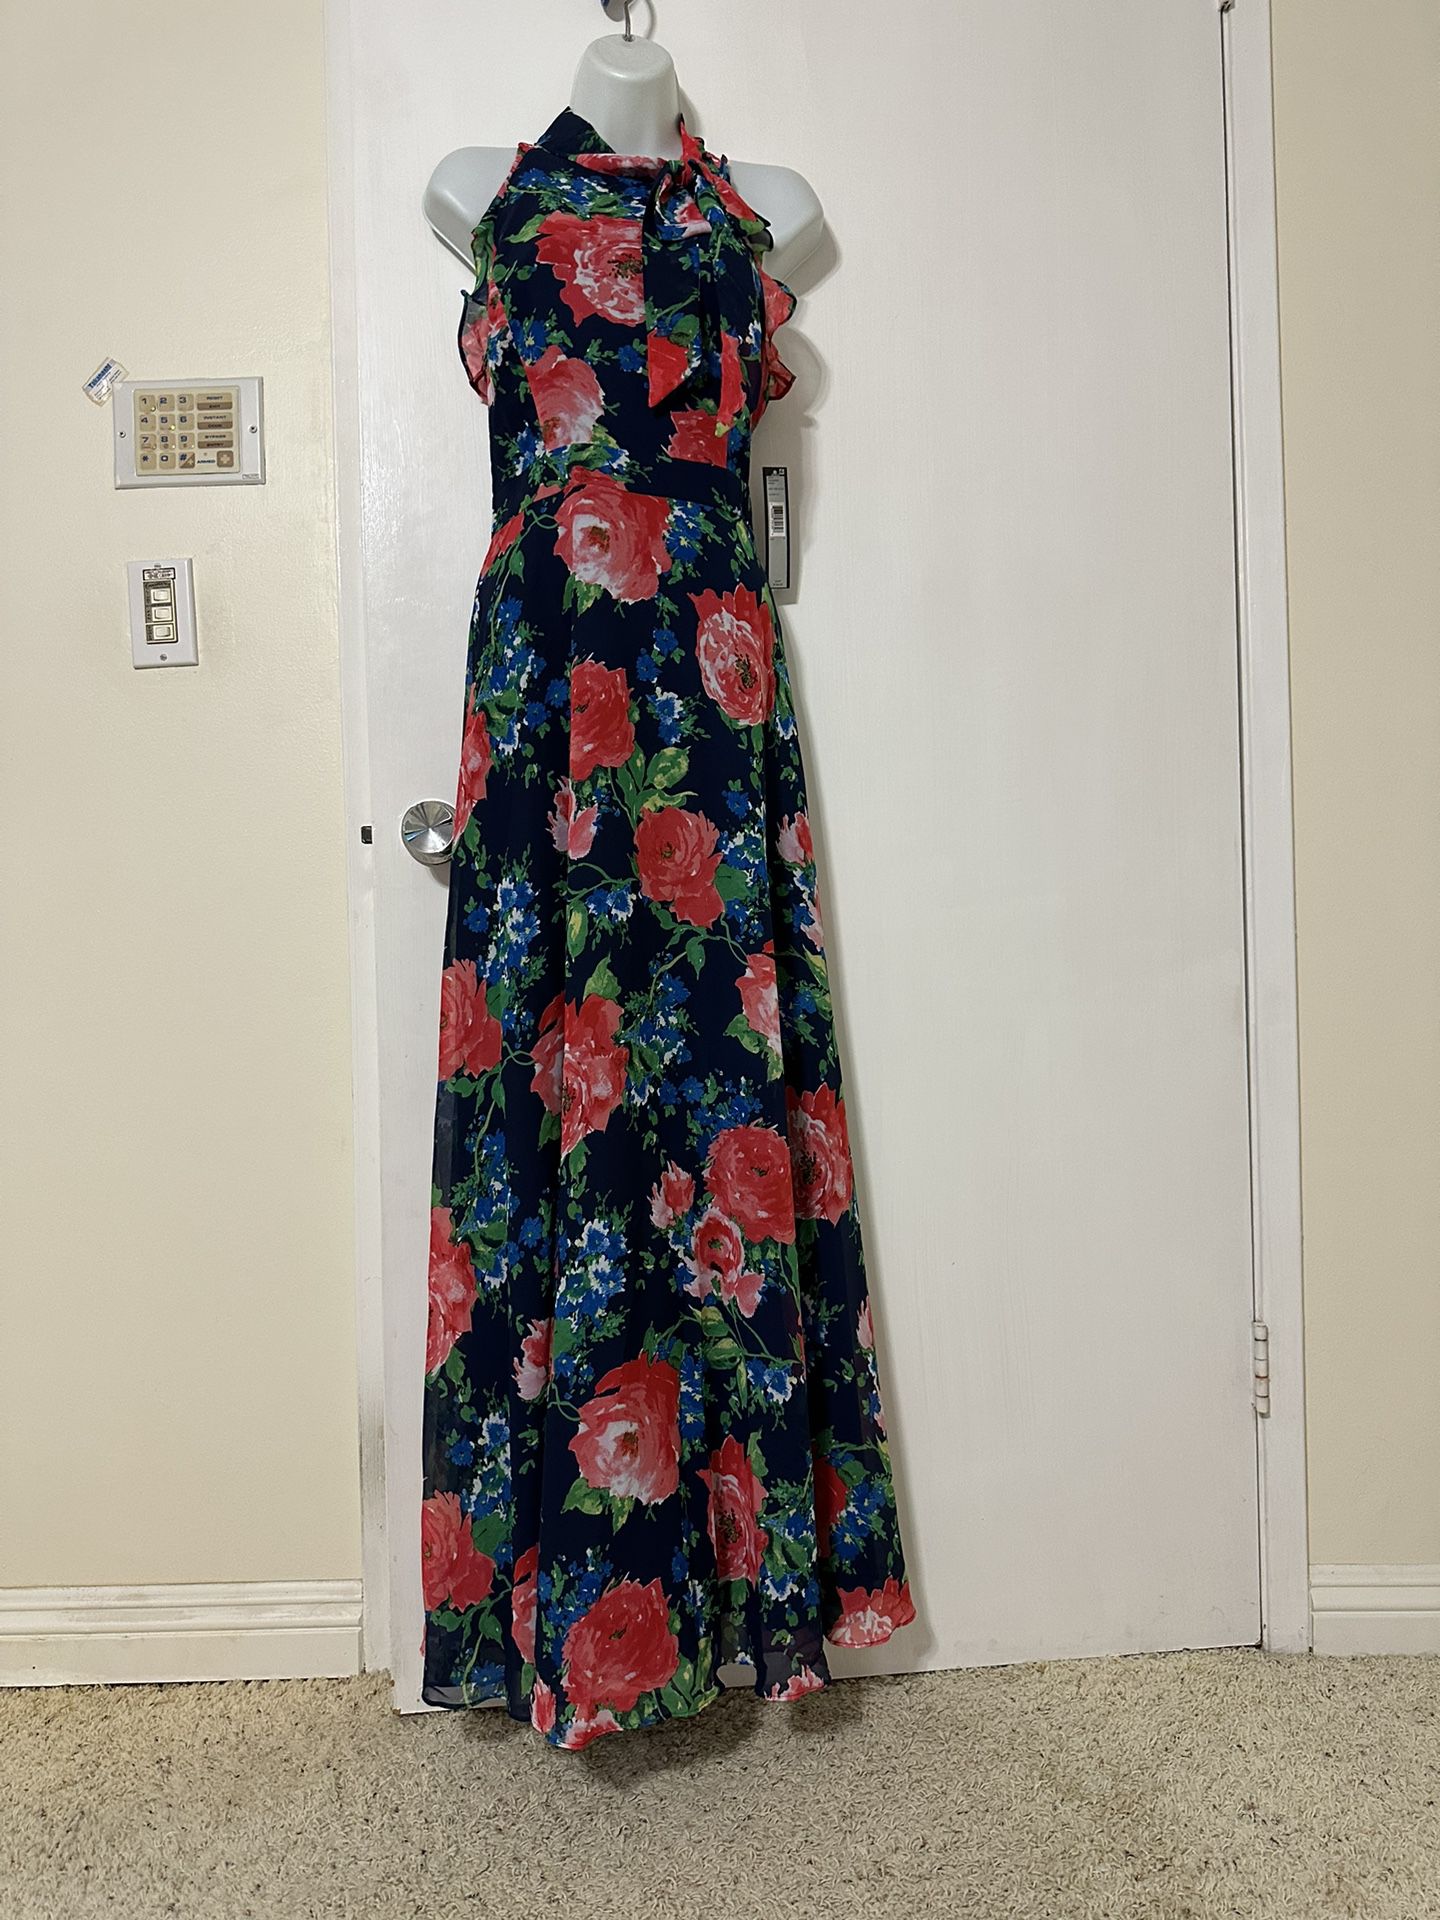 Rose Flowers Dress, Blue, Red, Green Colors, Band New 